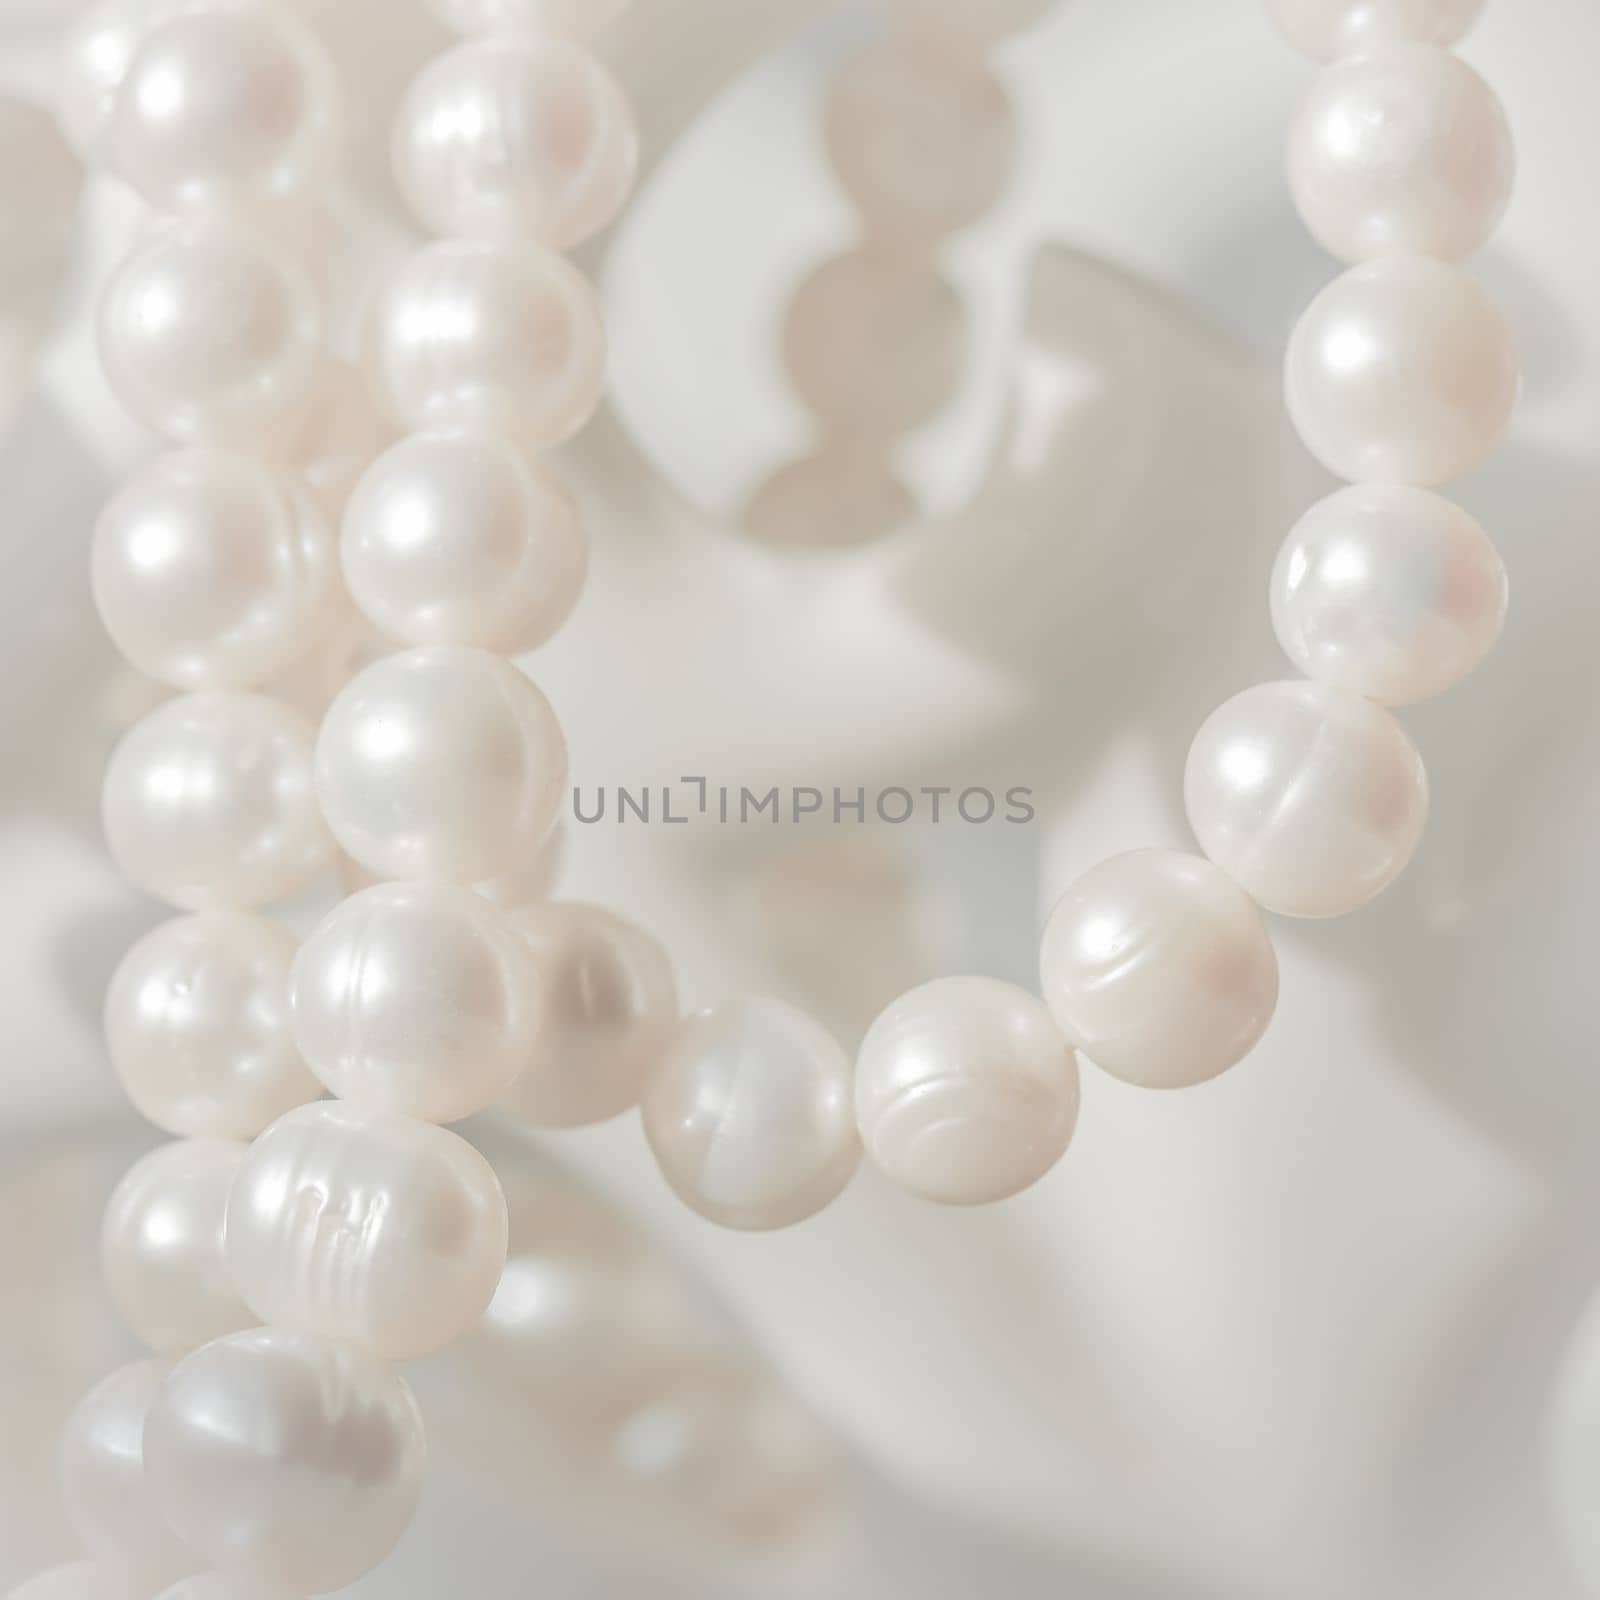 Nature white string of pearls in soft focus with highlights. Holidays background